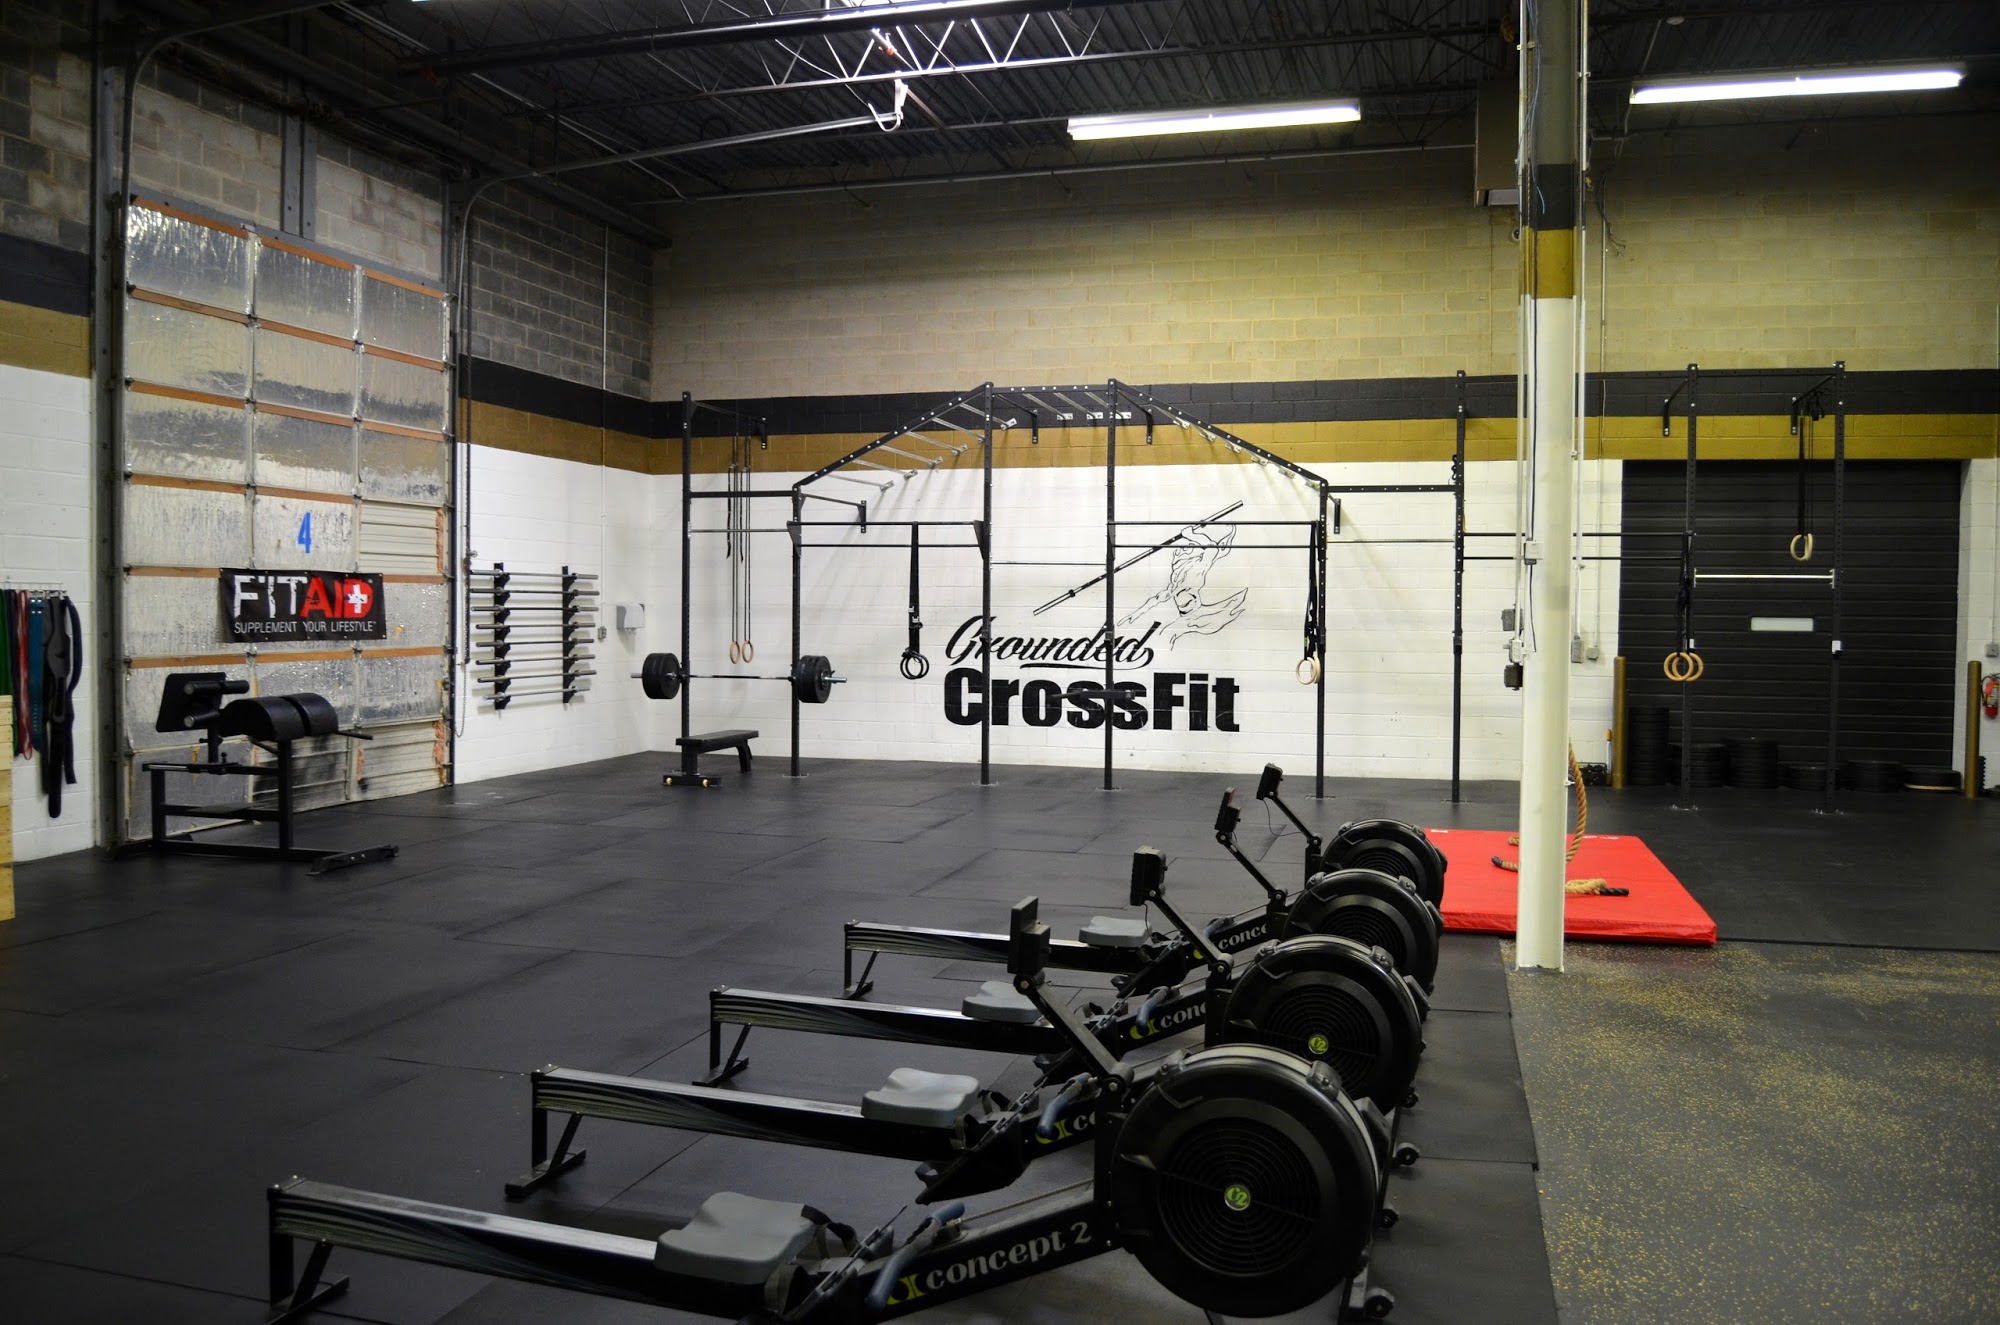 Grounded CrossFit